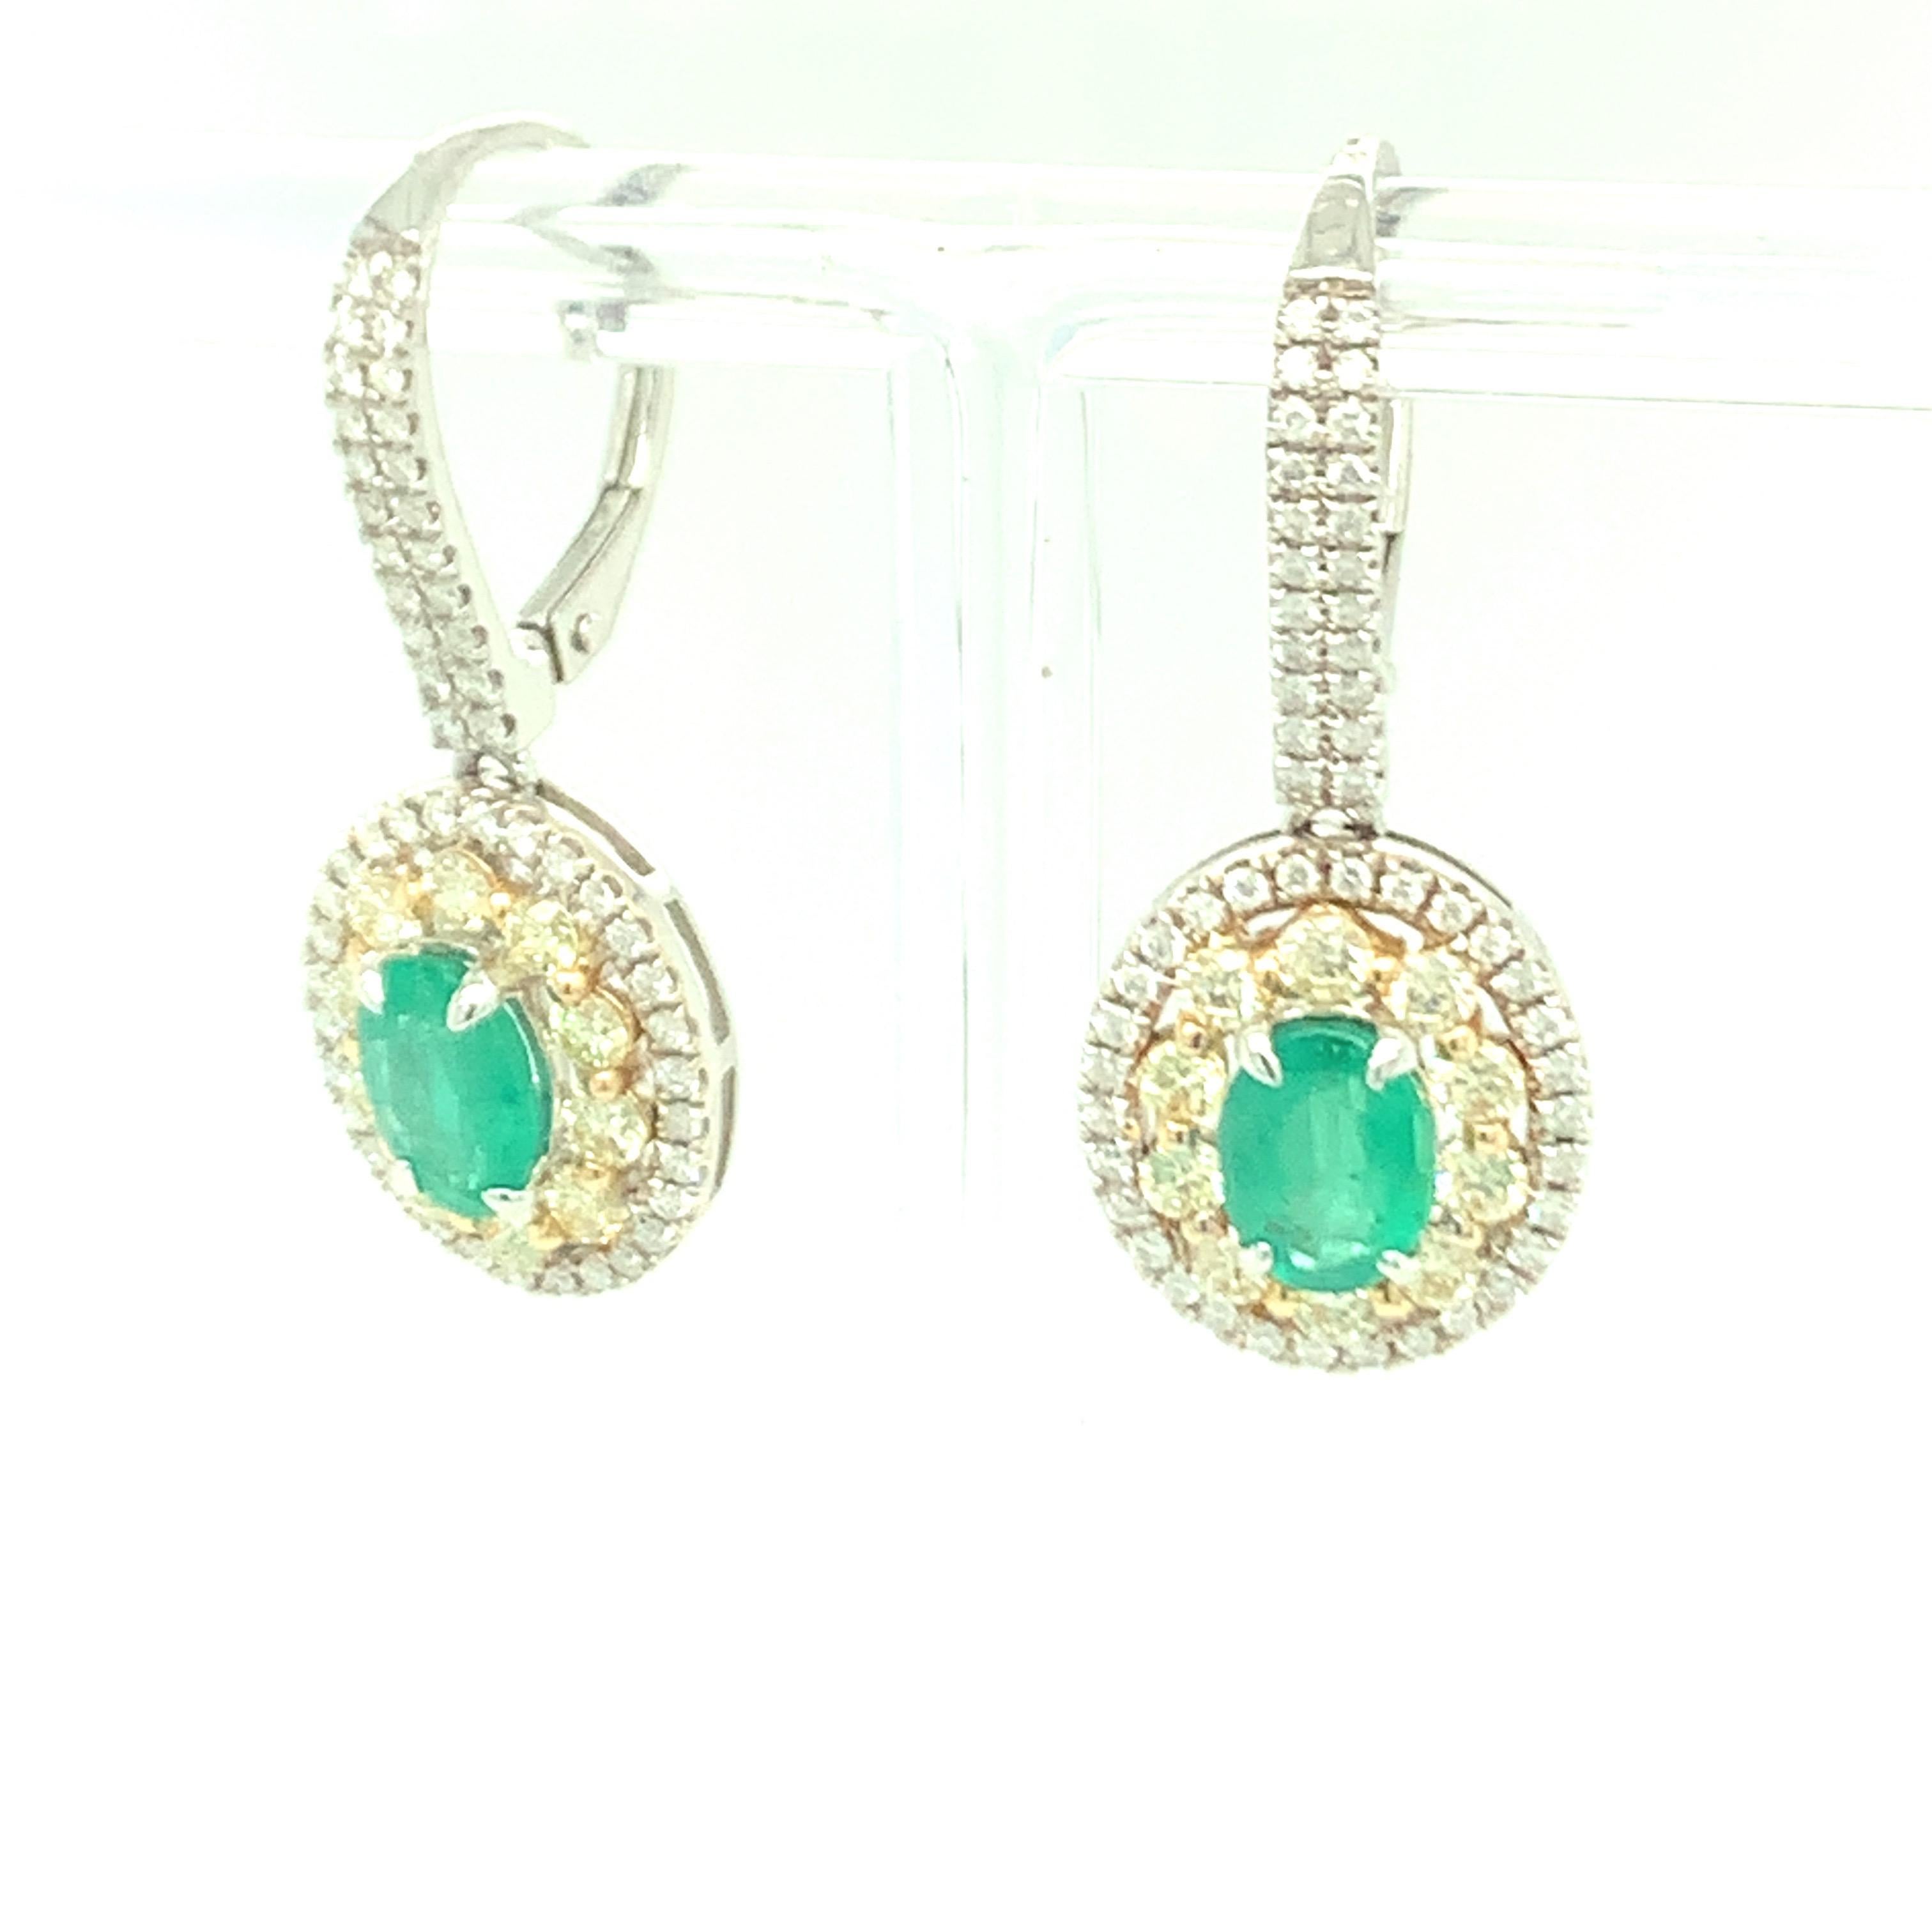 1.5 Carat Emerald Earrings with Yellow and White Diamond Set in Two Tone Gold 2